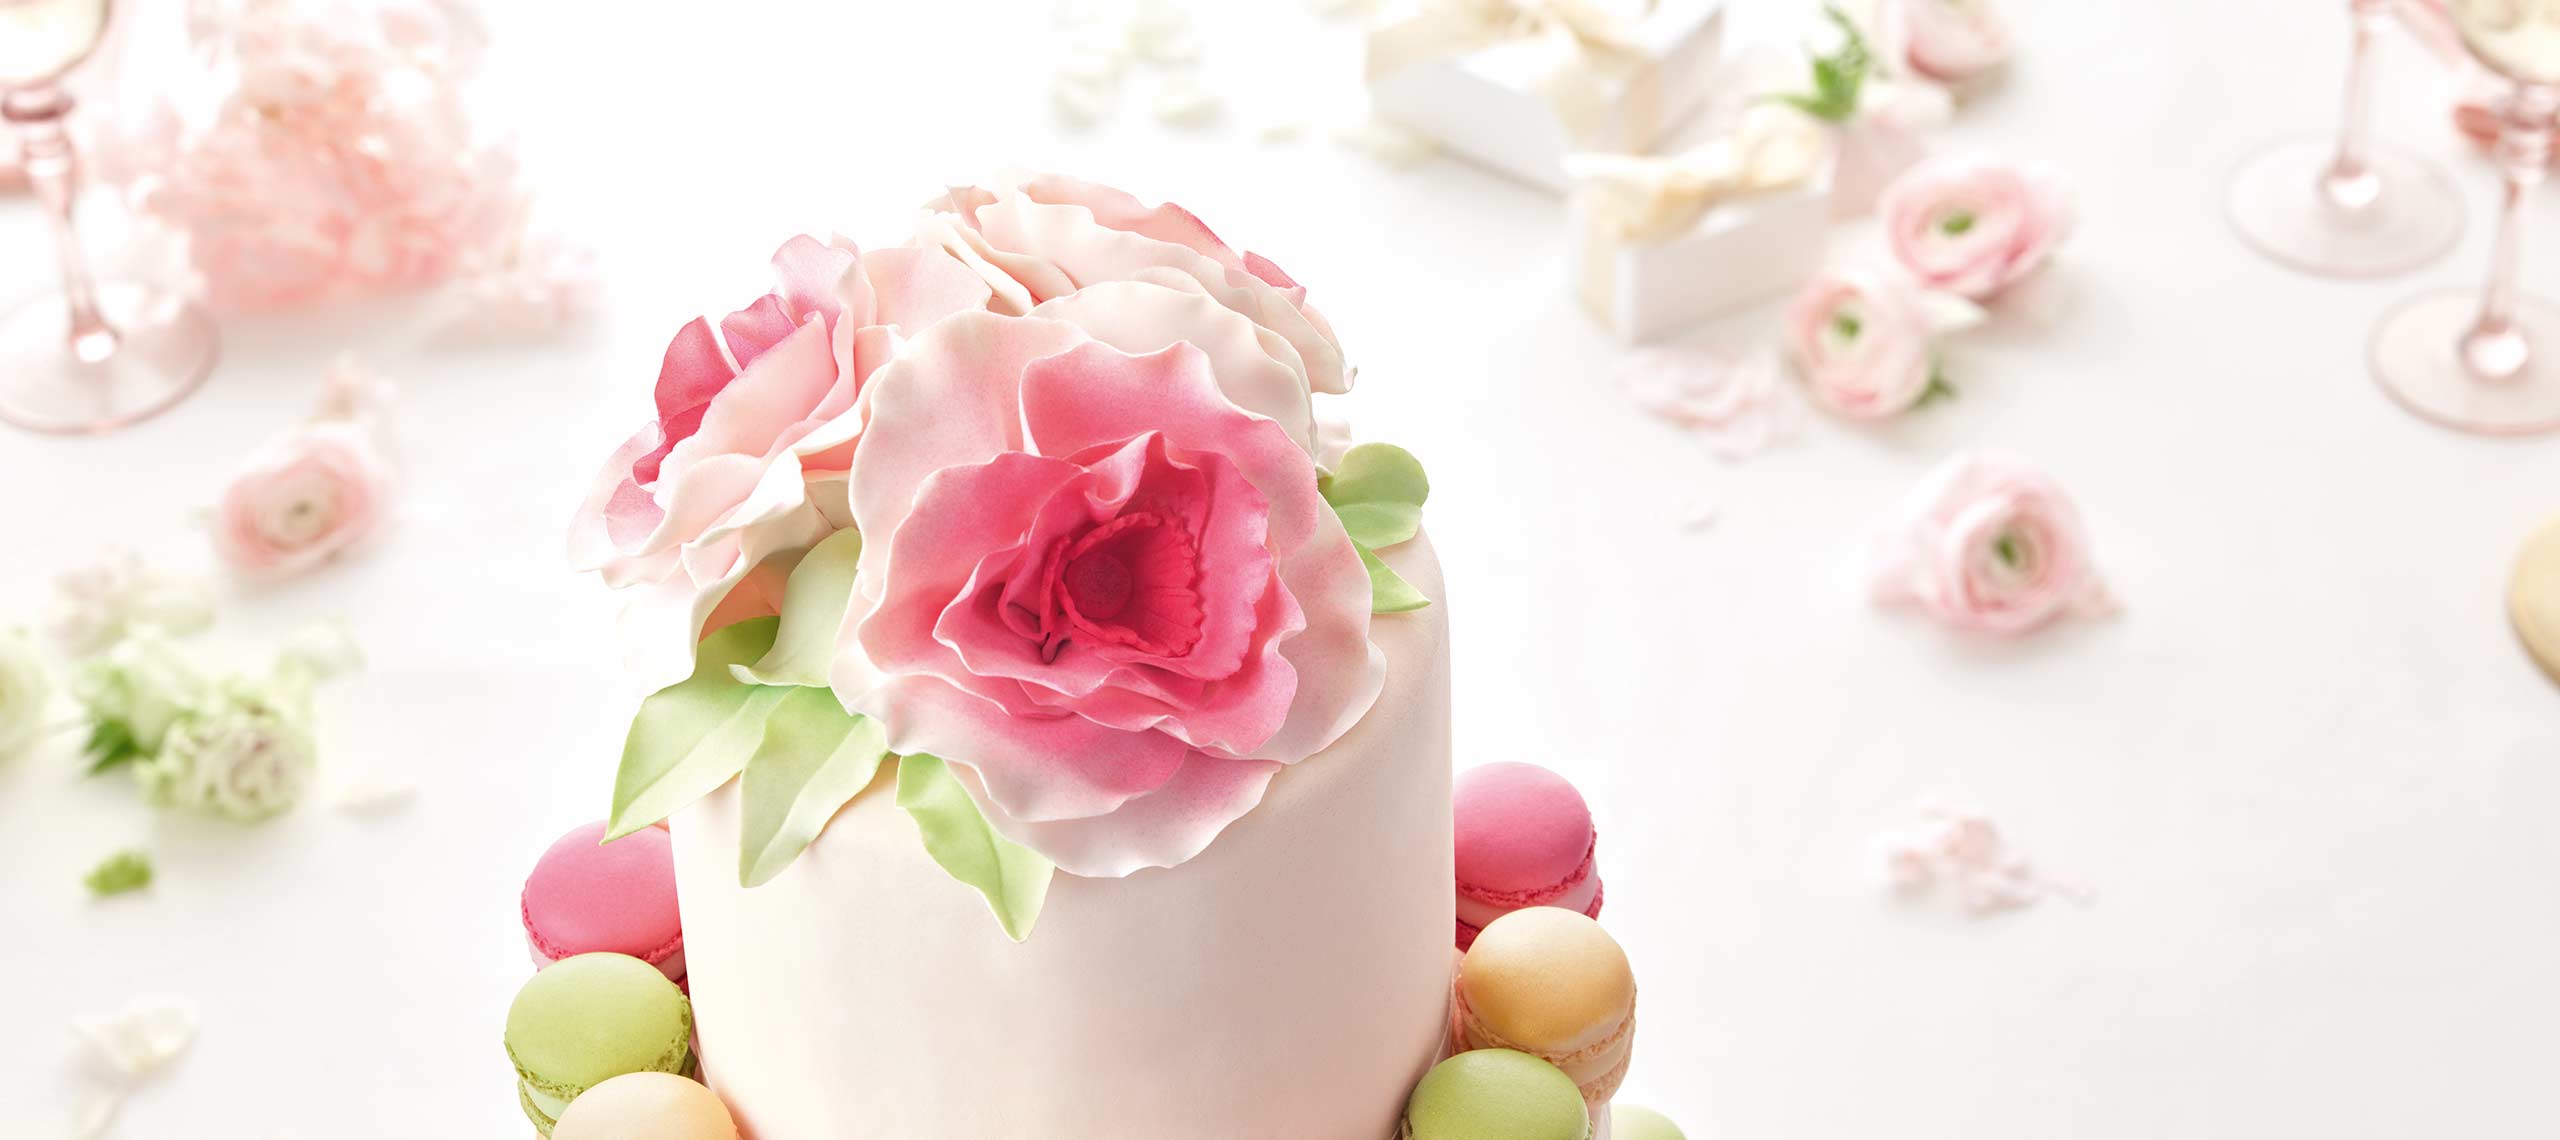 Wedding cakes and delicious wedding guest favours